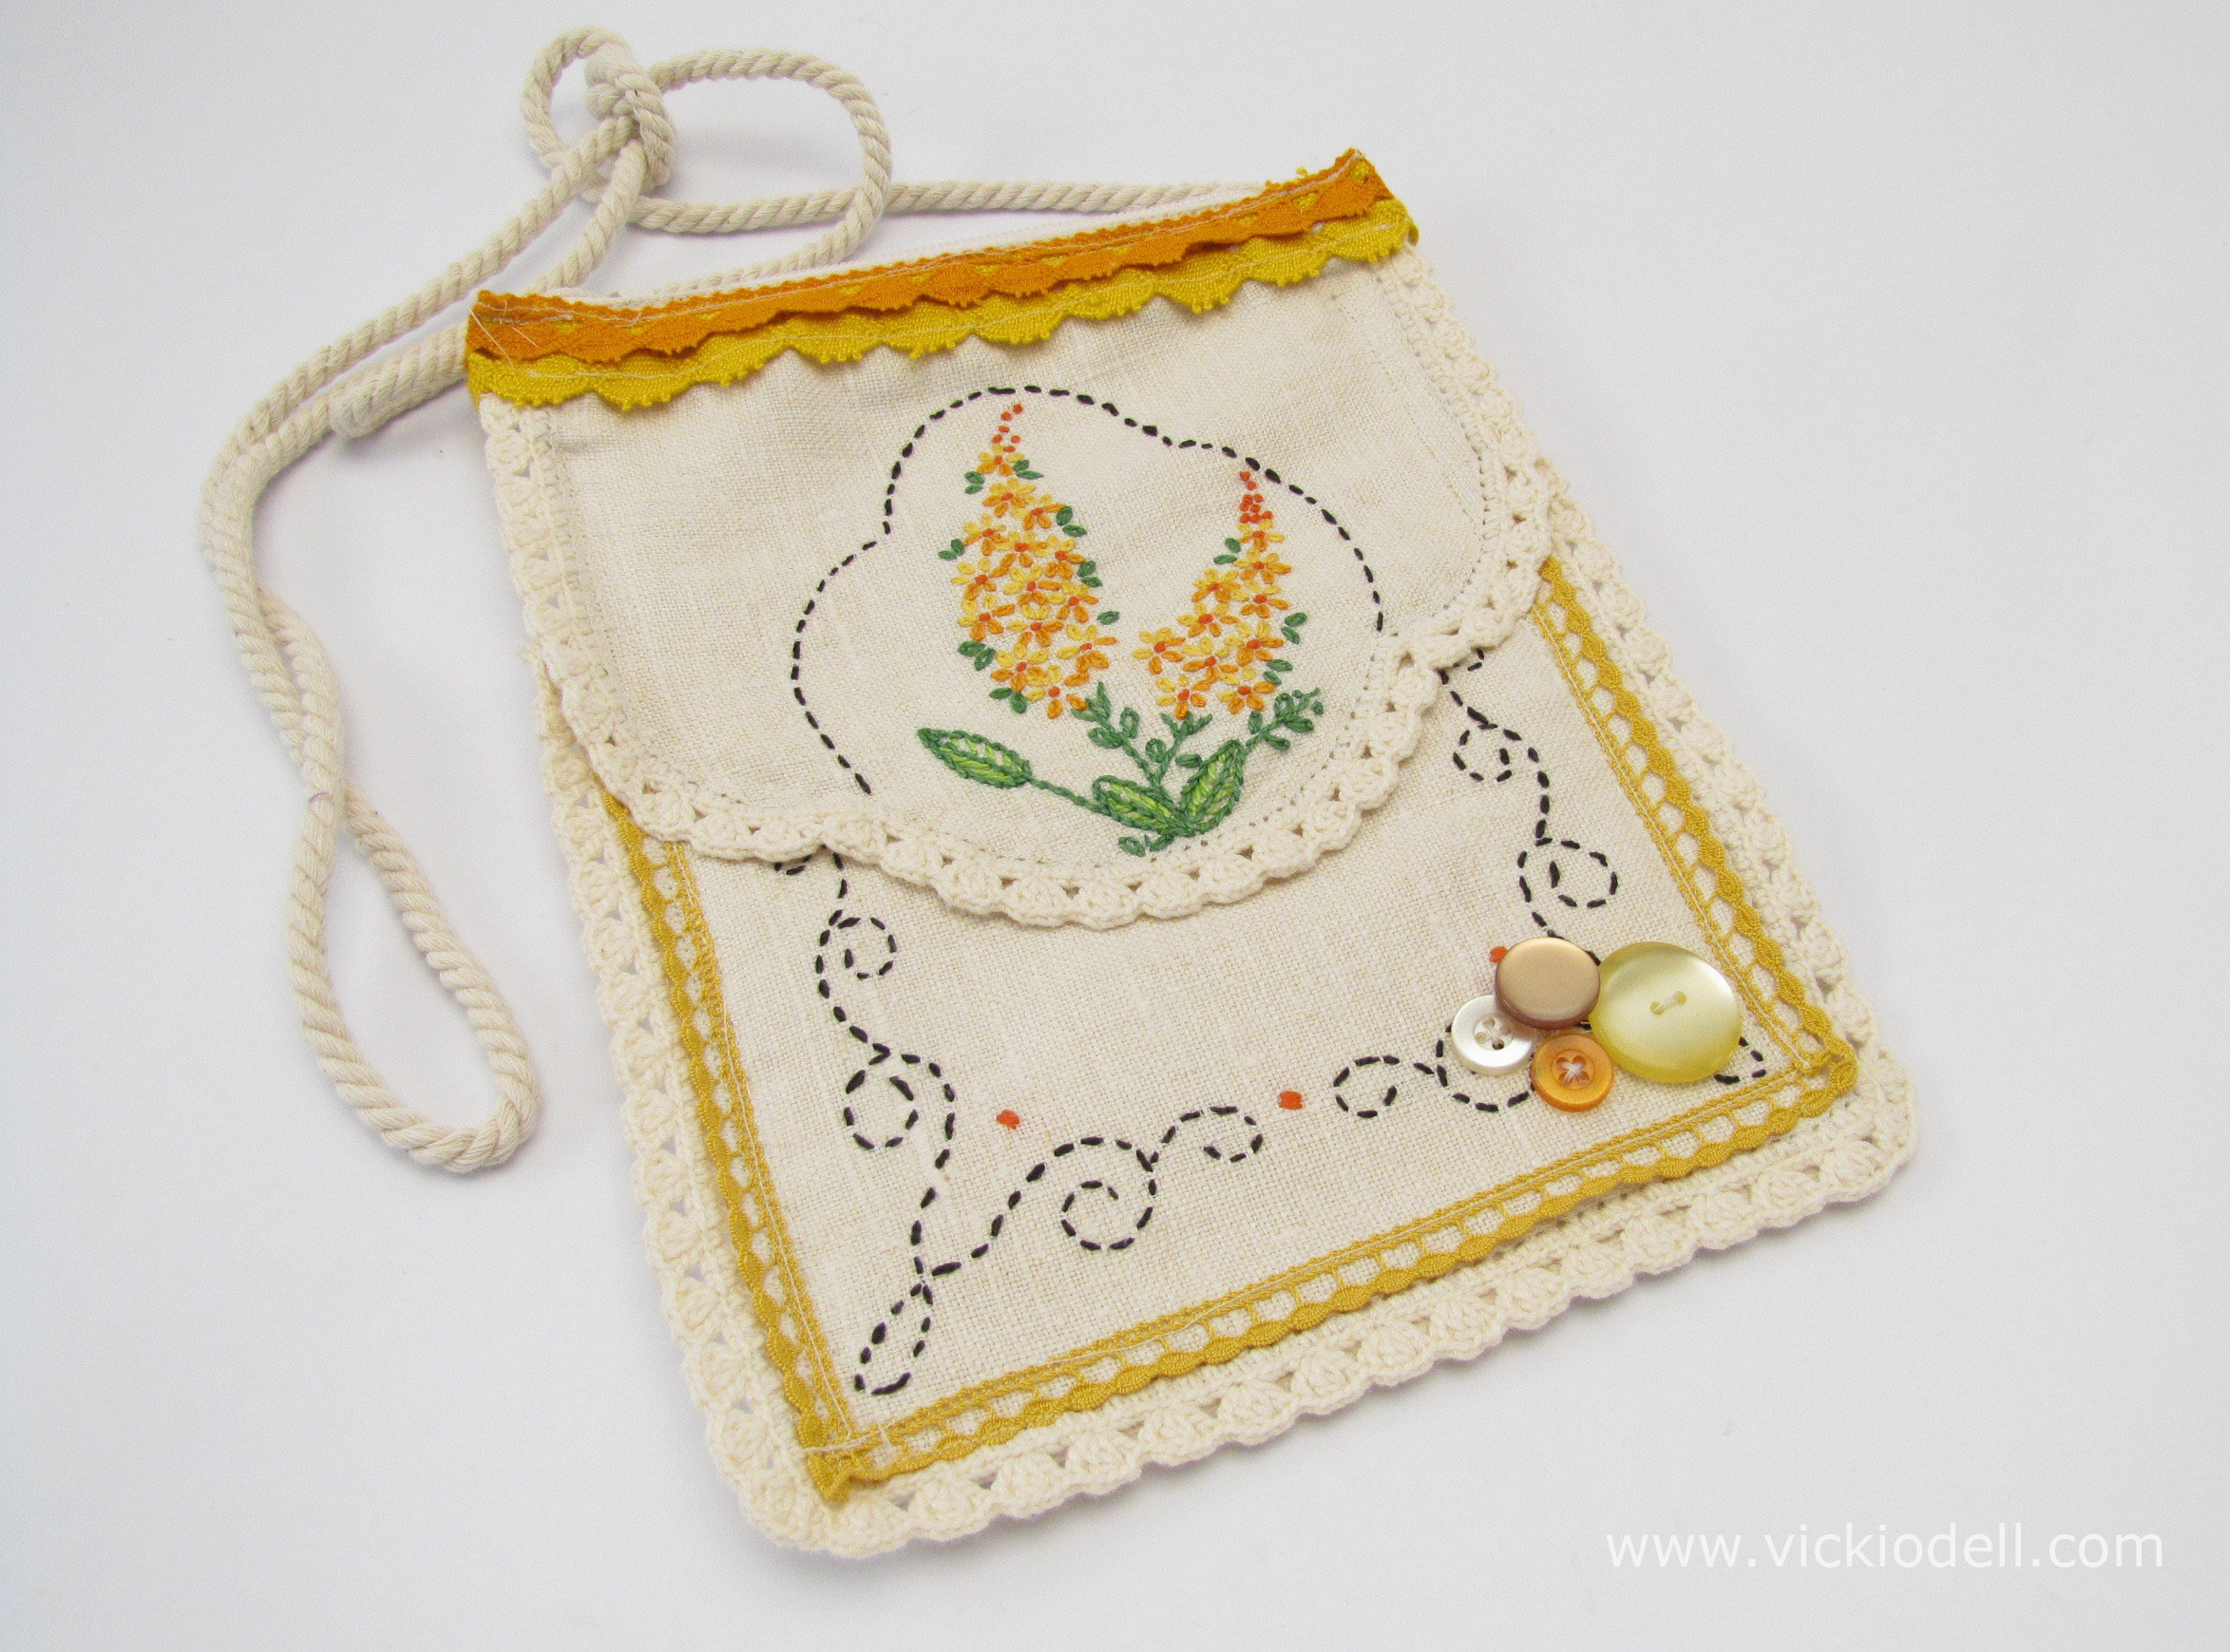 Thrifting Thursday – Embellish a Small Bag with Vintage Needlework